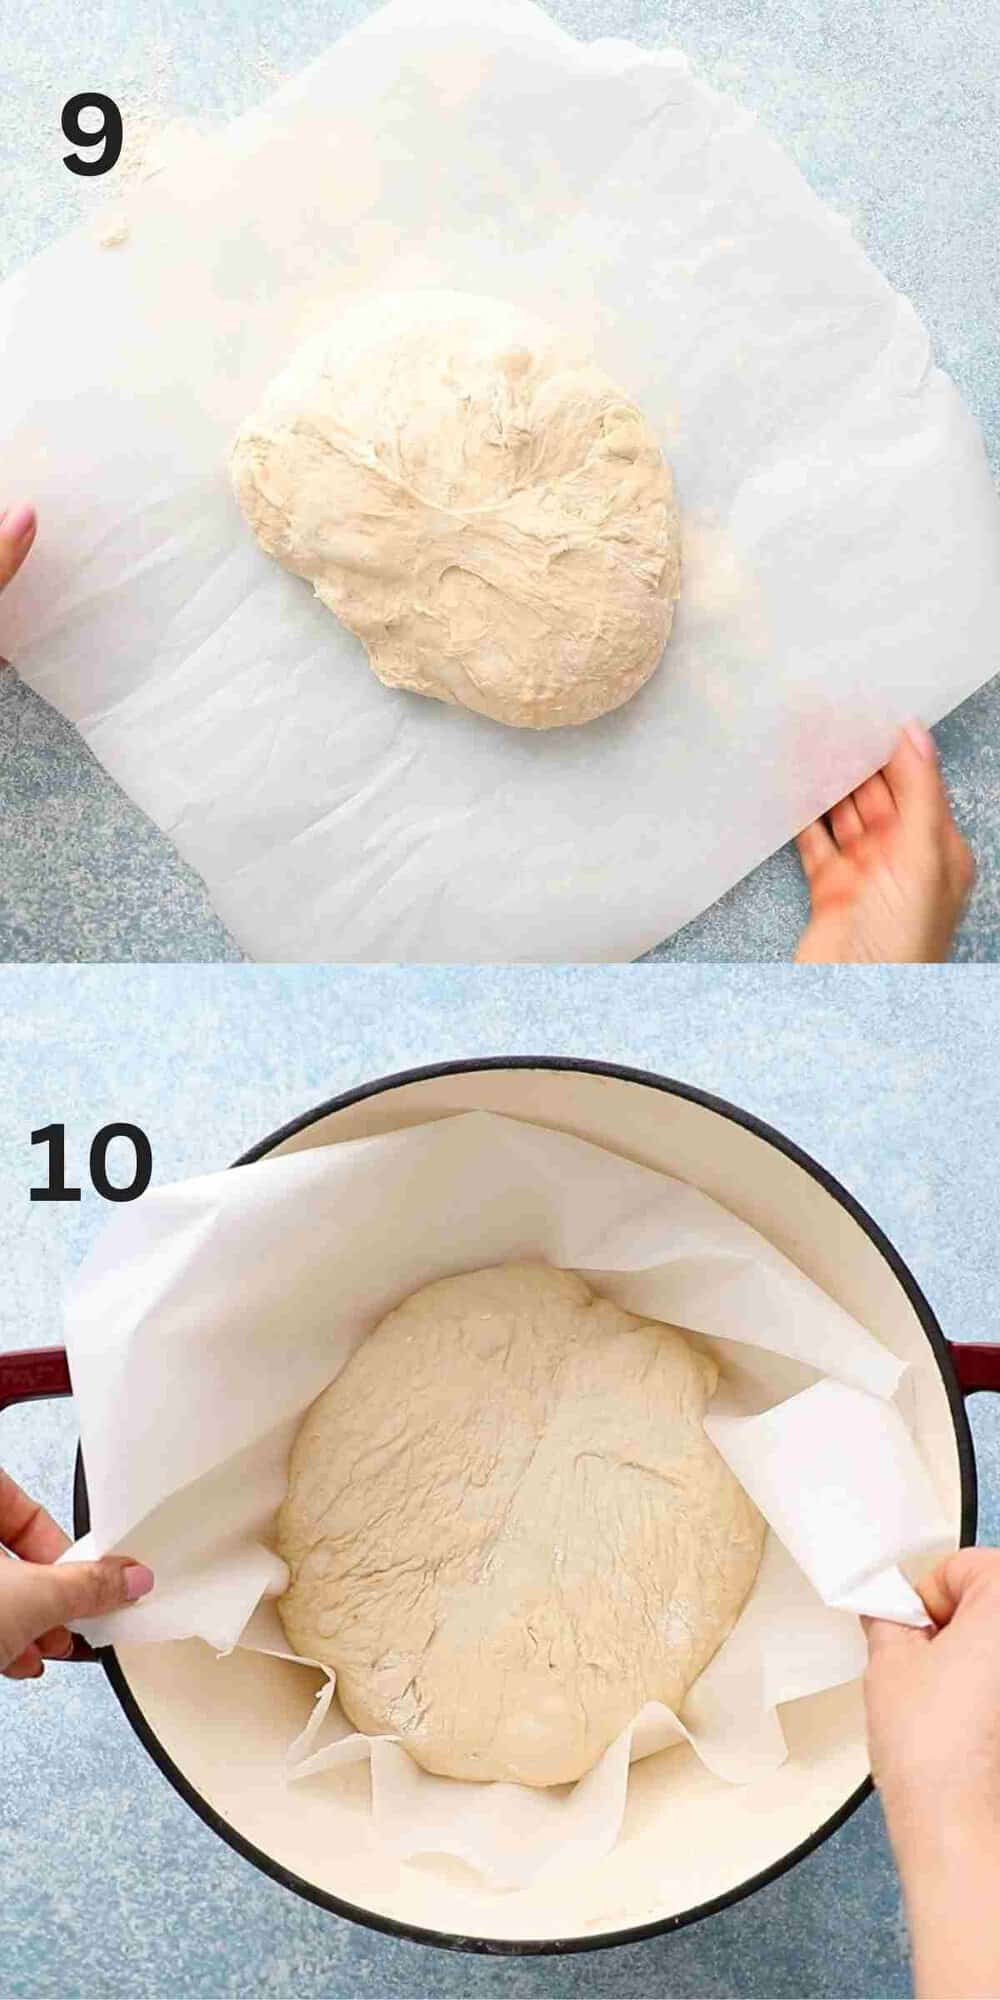 2 photo collage of 2 hands placing risen yeast dough in a dutch oven.